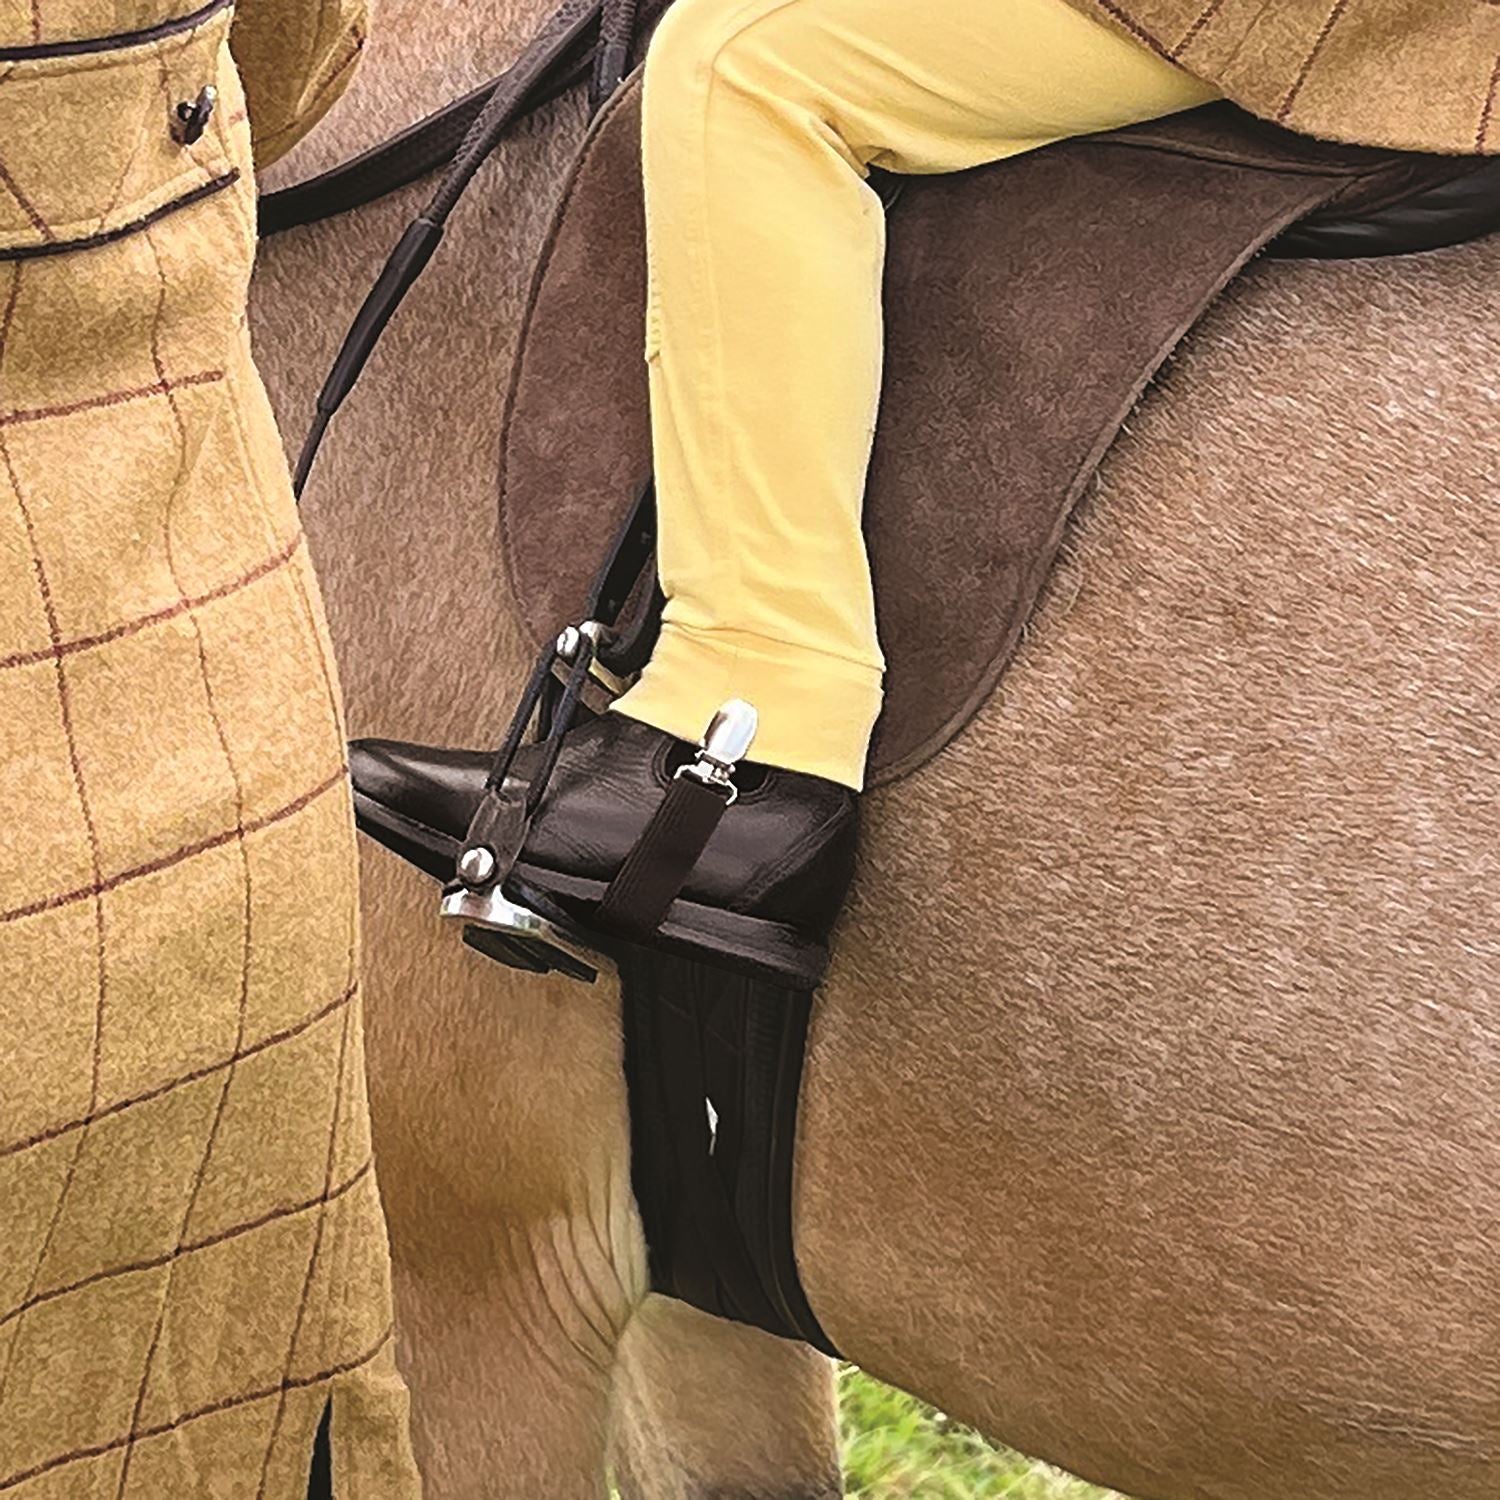 Equetech Tots Childs Jodhpur Clips - Just Horse Riders